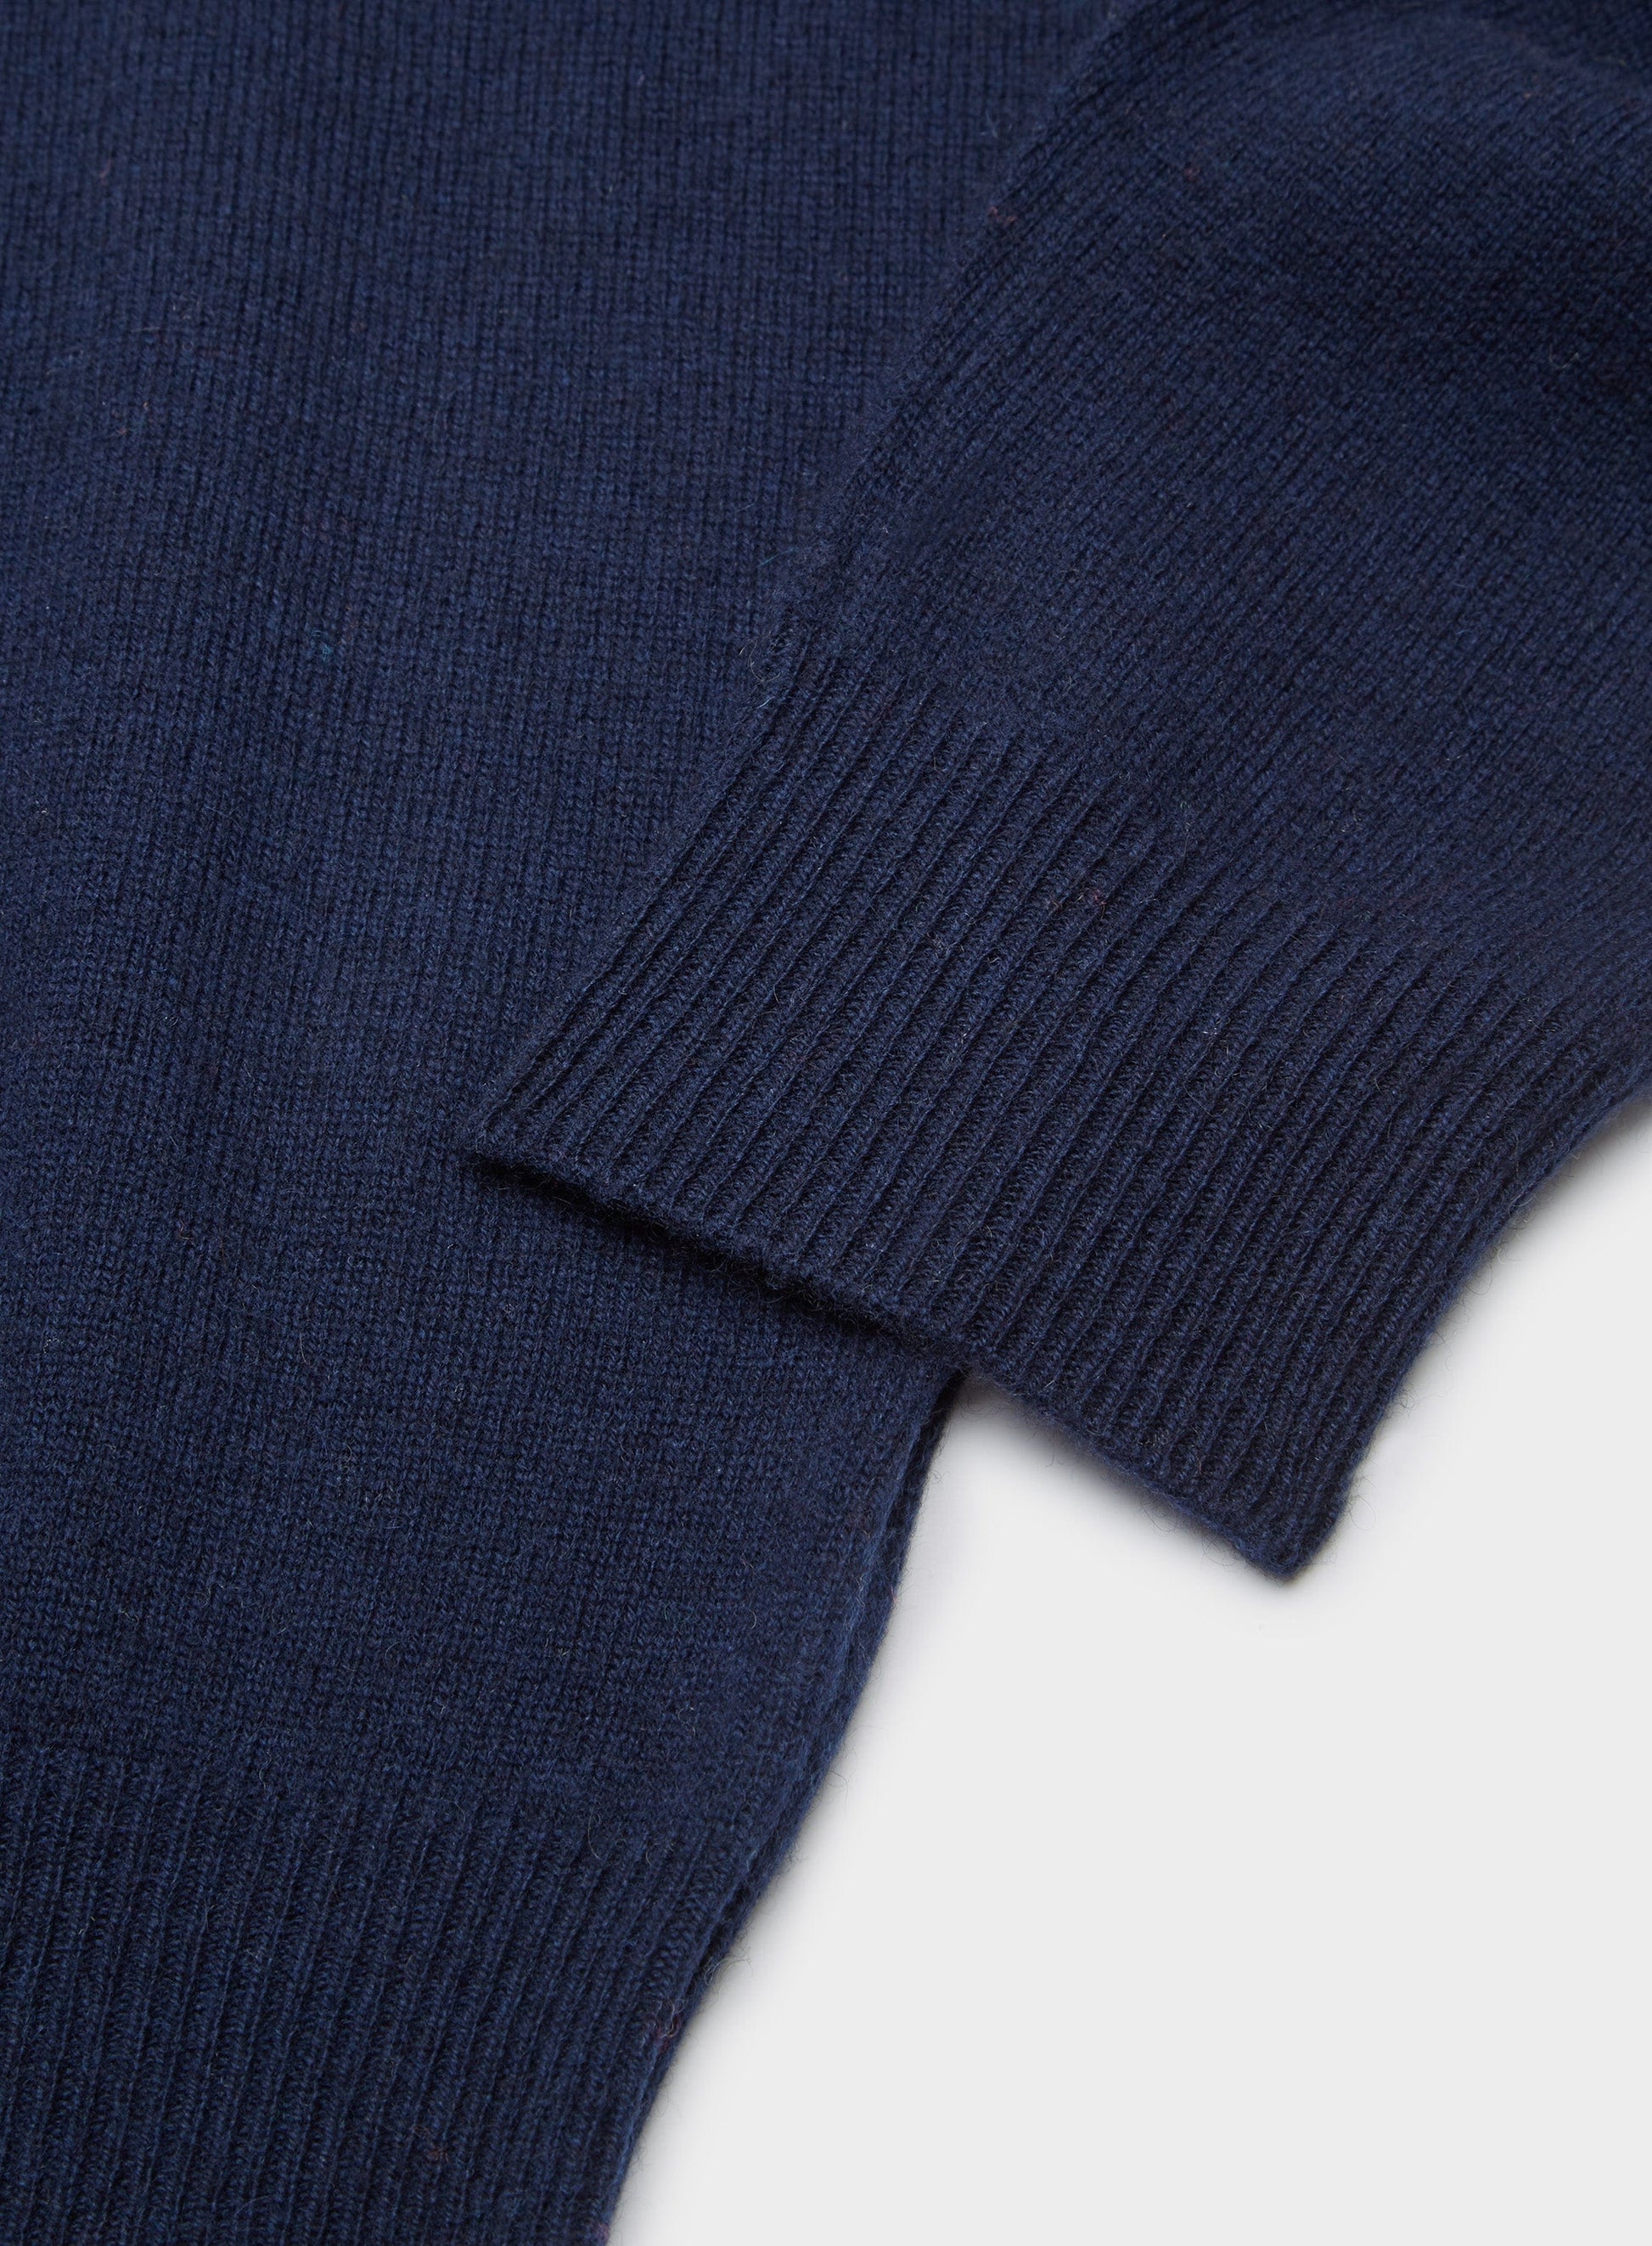 Mens Cashmere Crew Neck Jumper in Navy - Oxford Shirt Co.